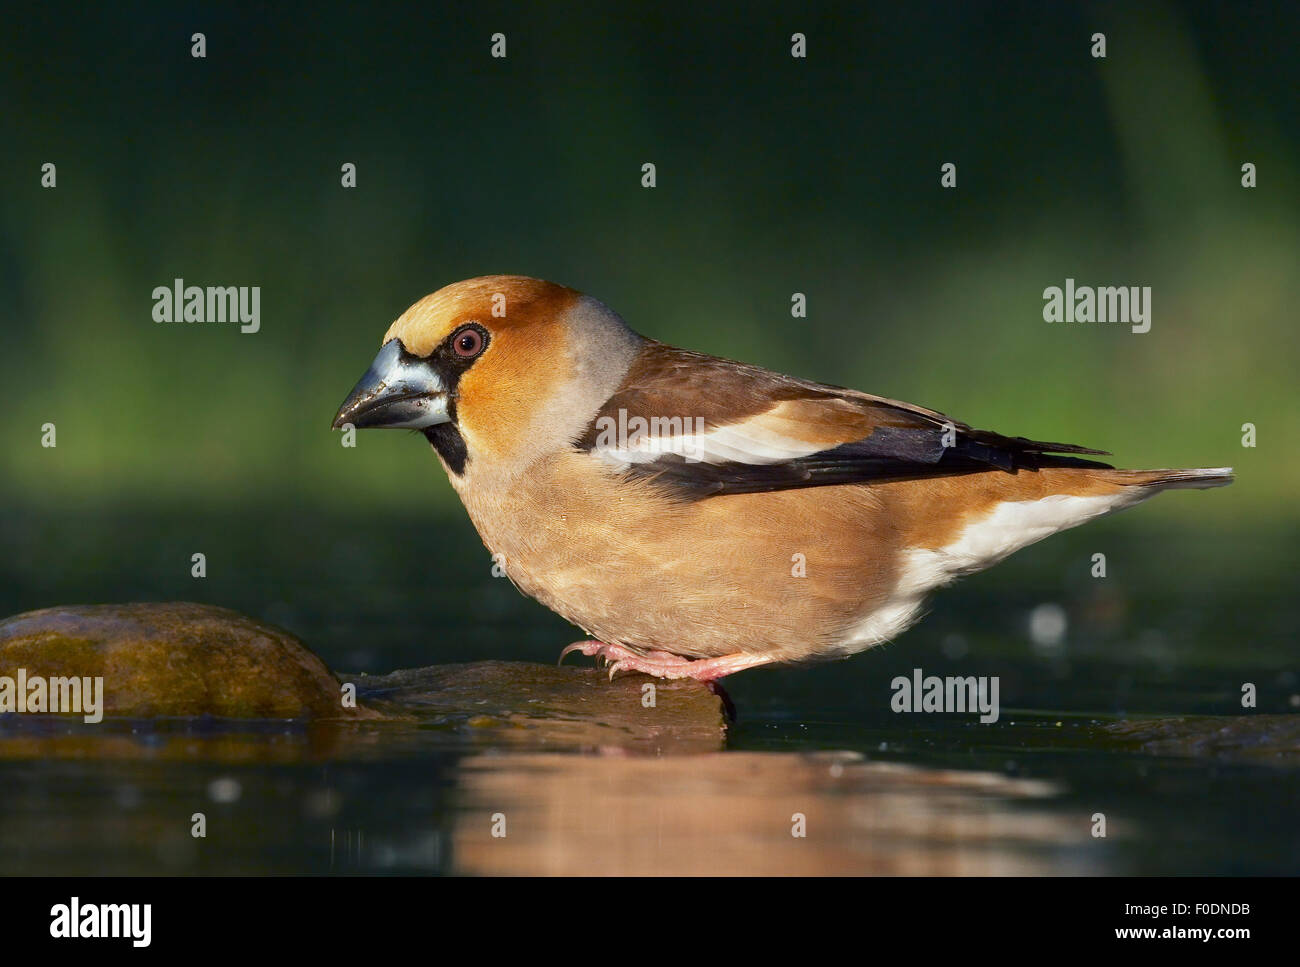 Hawfinch (Coccothraustes coccothraustes) in acqua, Pusztaszer, Ungheria, Maggio 2008 Foto Stock